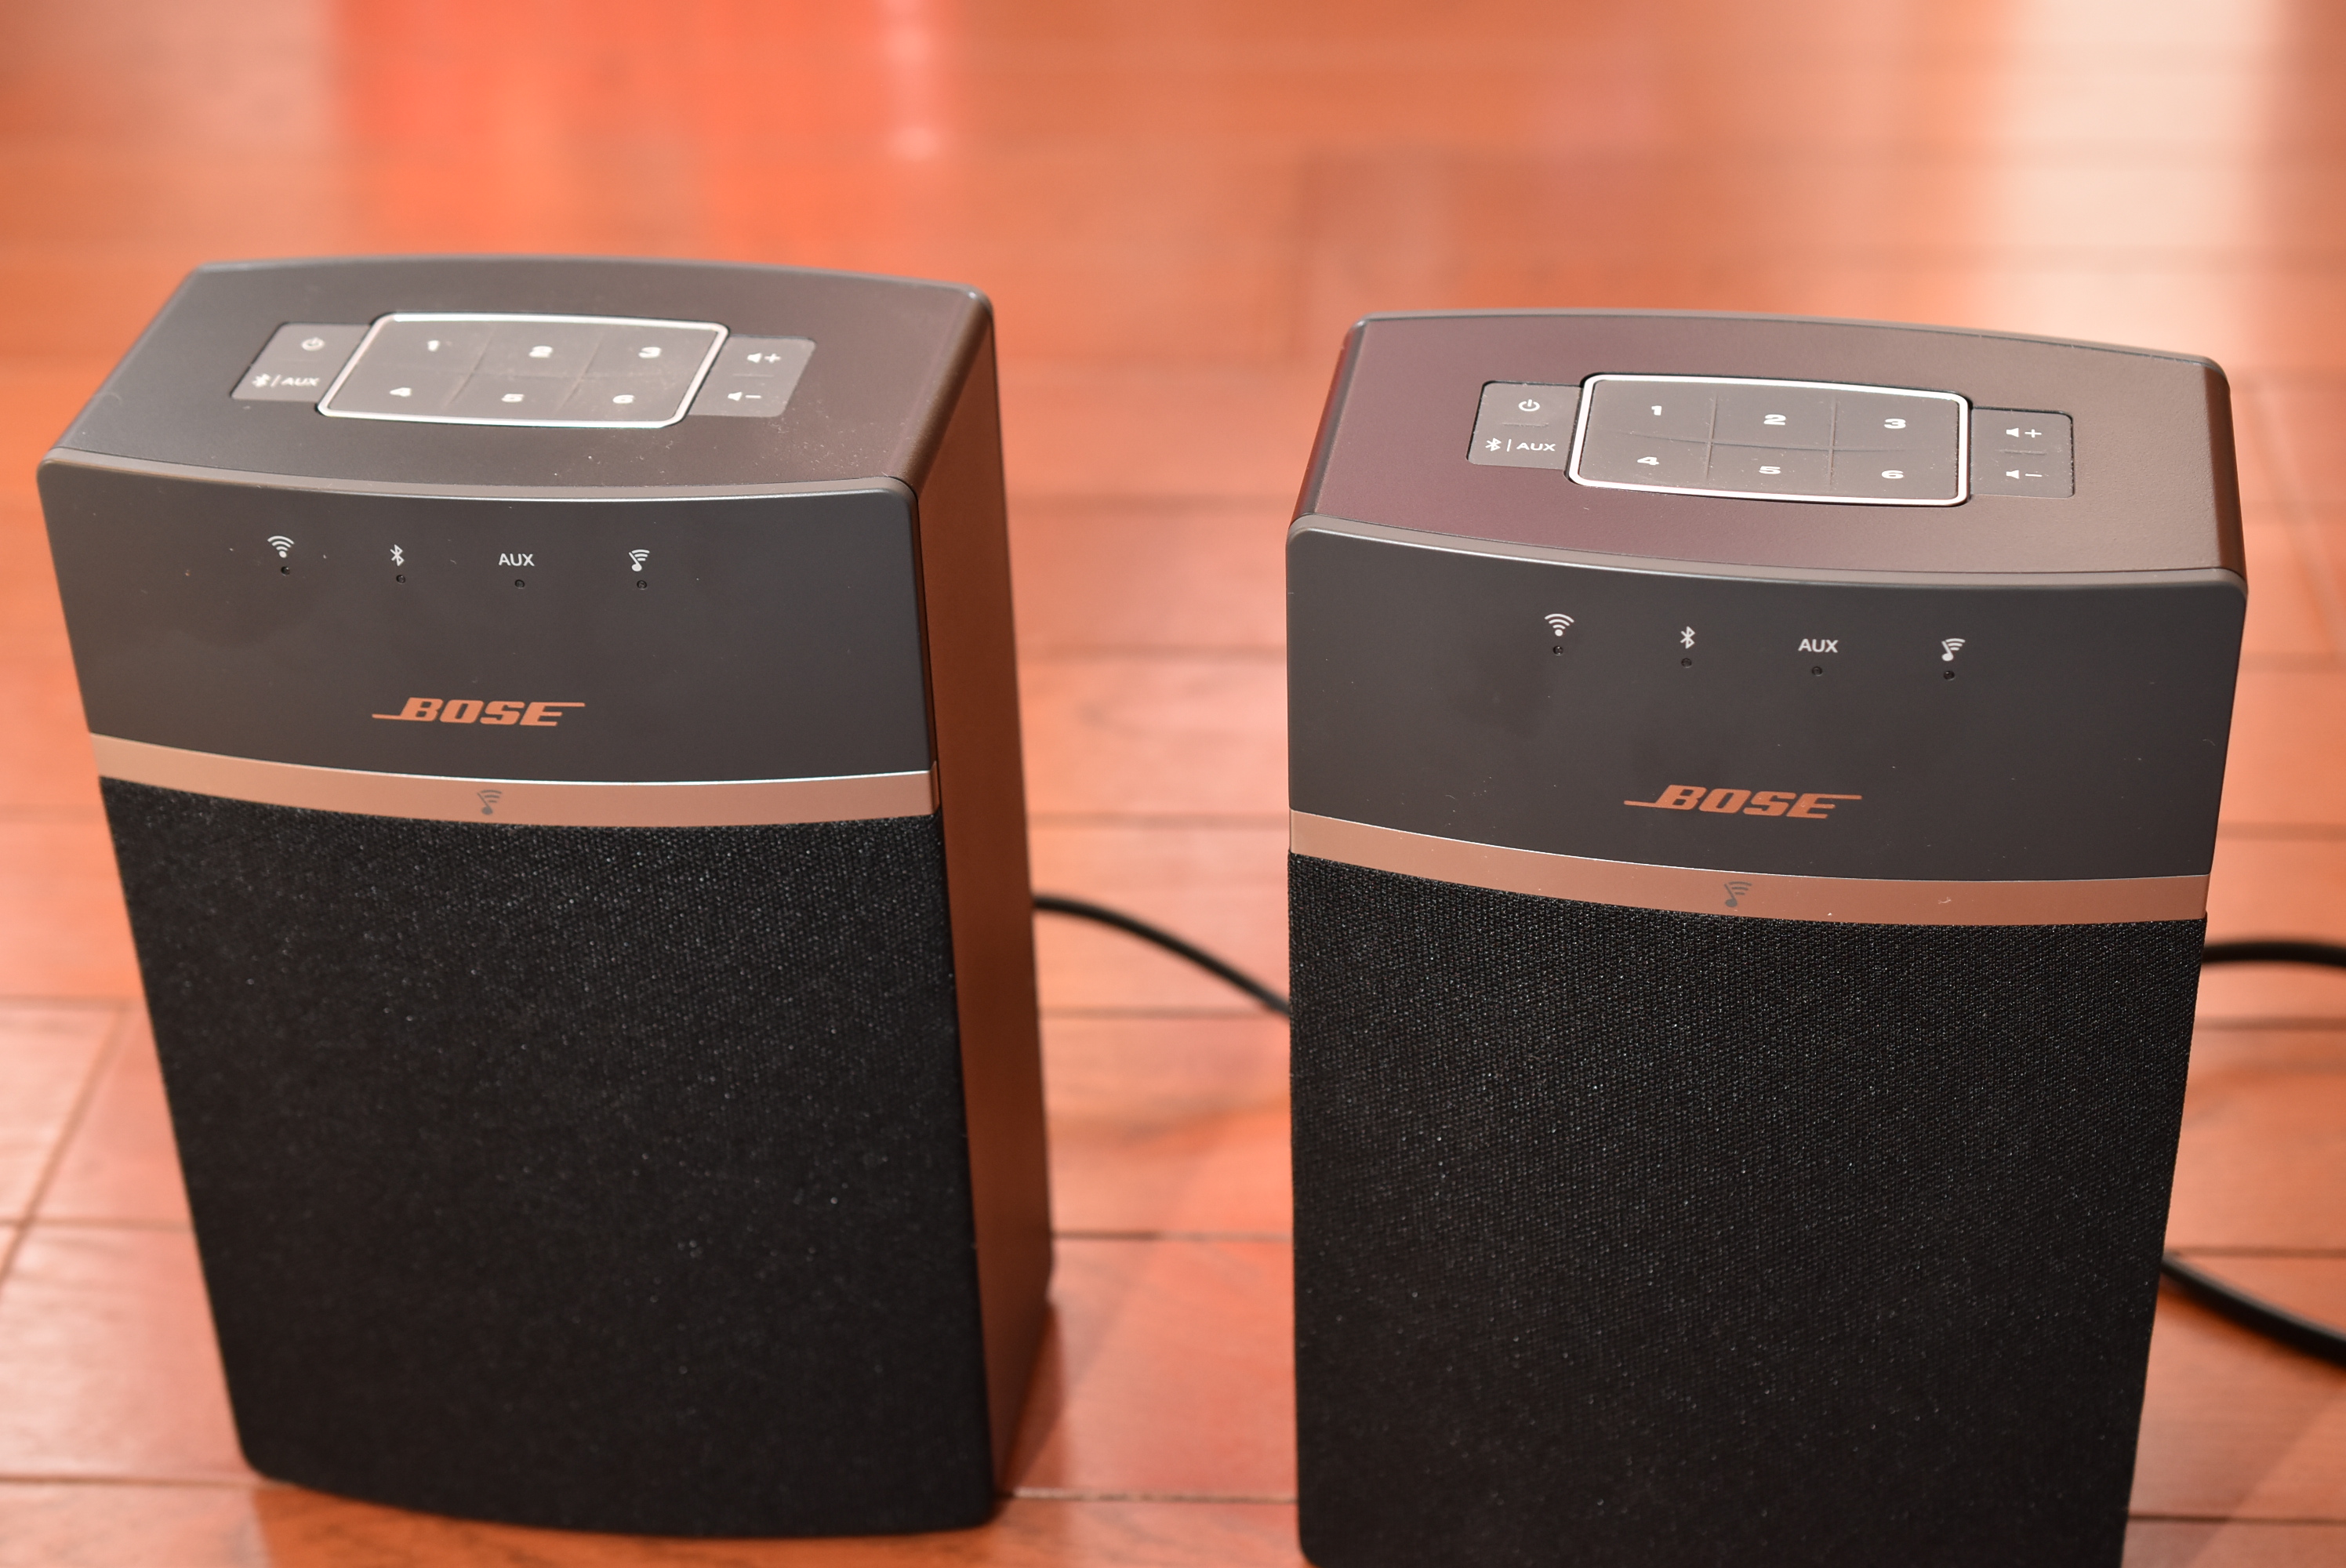 Bose SoundTouch 10 のステレオペア機能を試す！SoundTouch ってすごく 